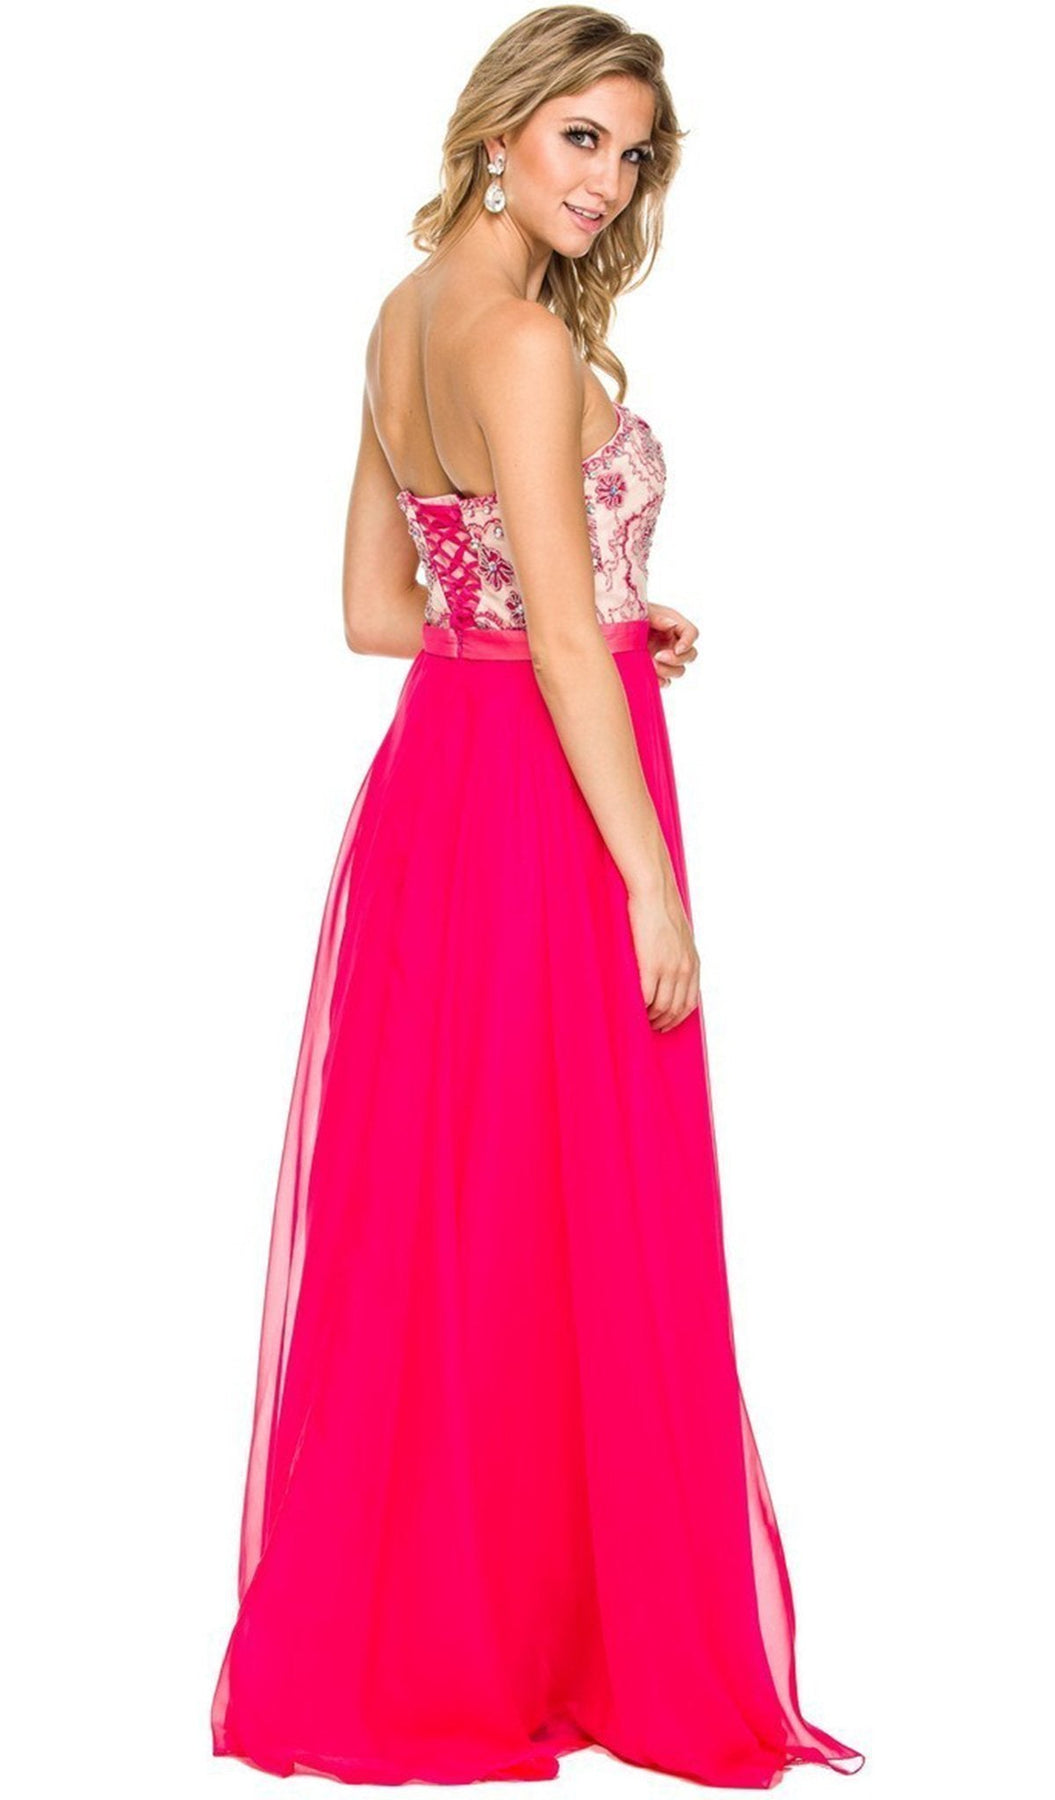 Nox Anabel - 8146 Strapless Sweetheart A-Line Dress Special Occasion Dress